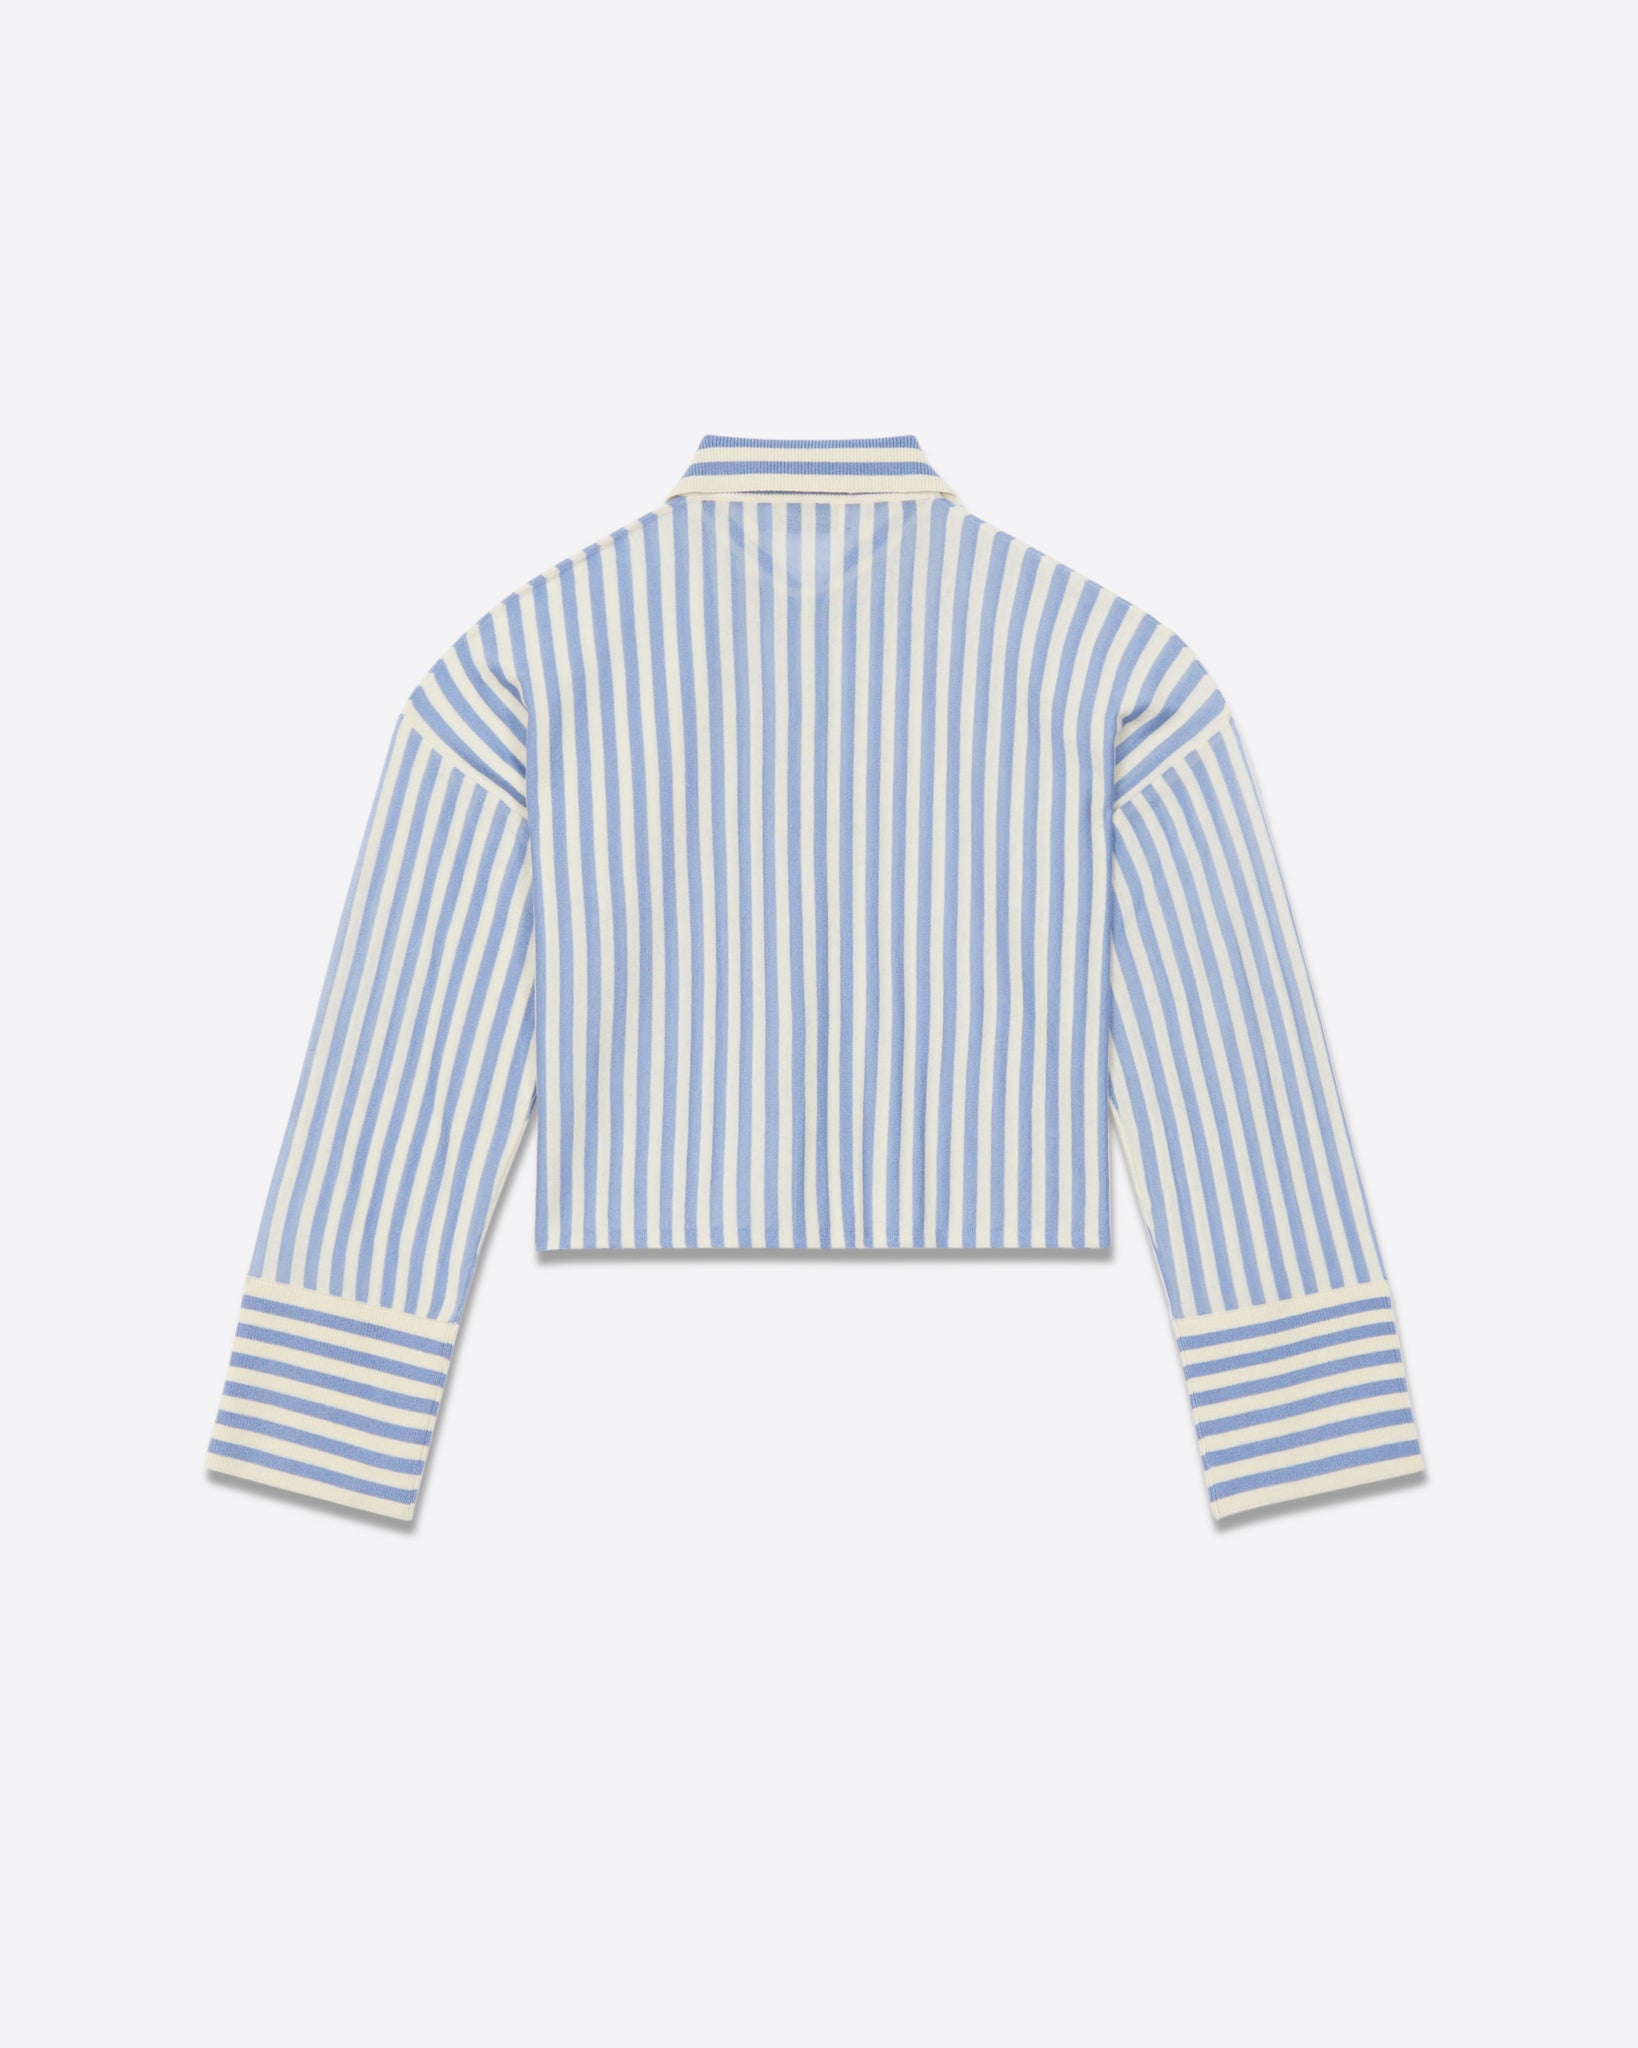 HATHAWAY SOFT-WRAP-SHIRT IN NAPTIME BLUES STRIPES